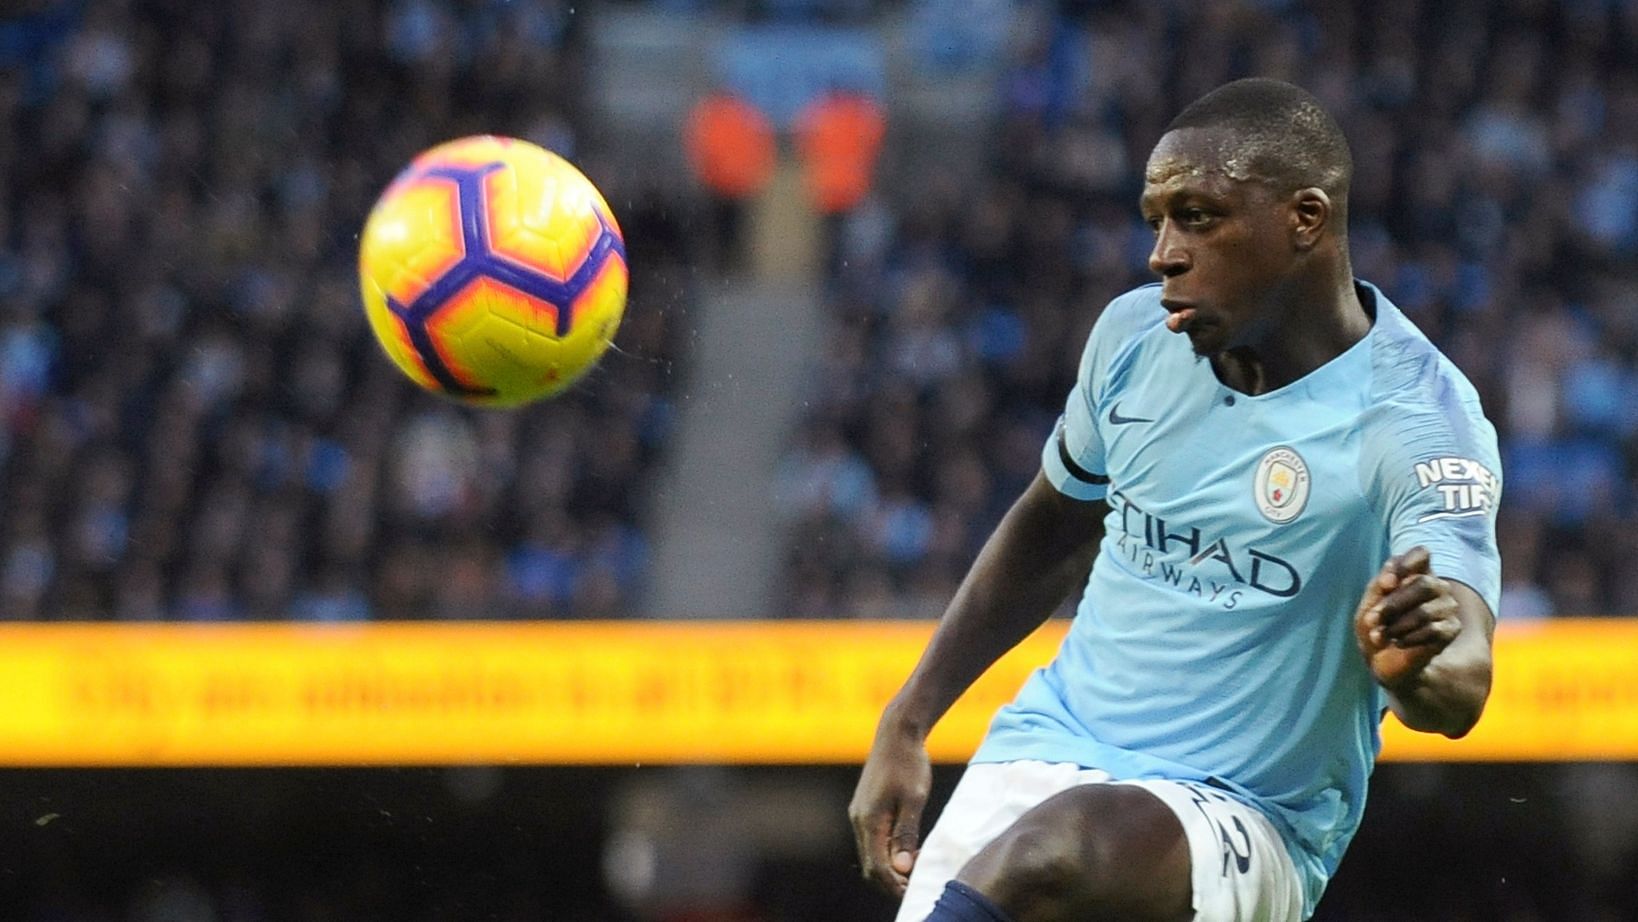 Benjamin Mendy has created confusion over his whereabouts